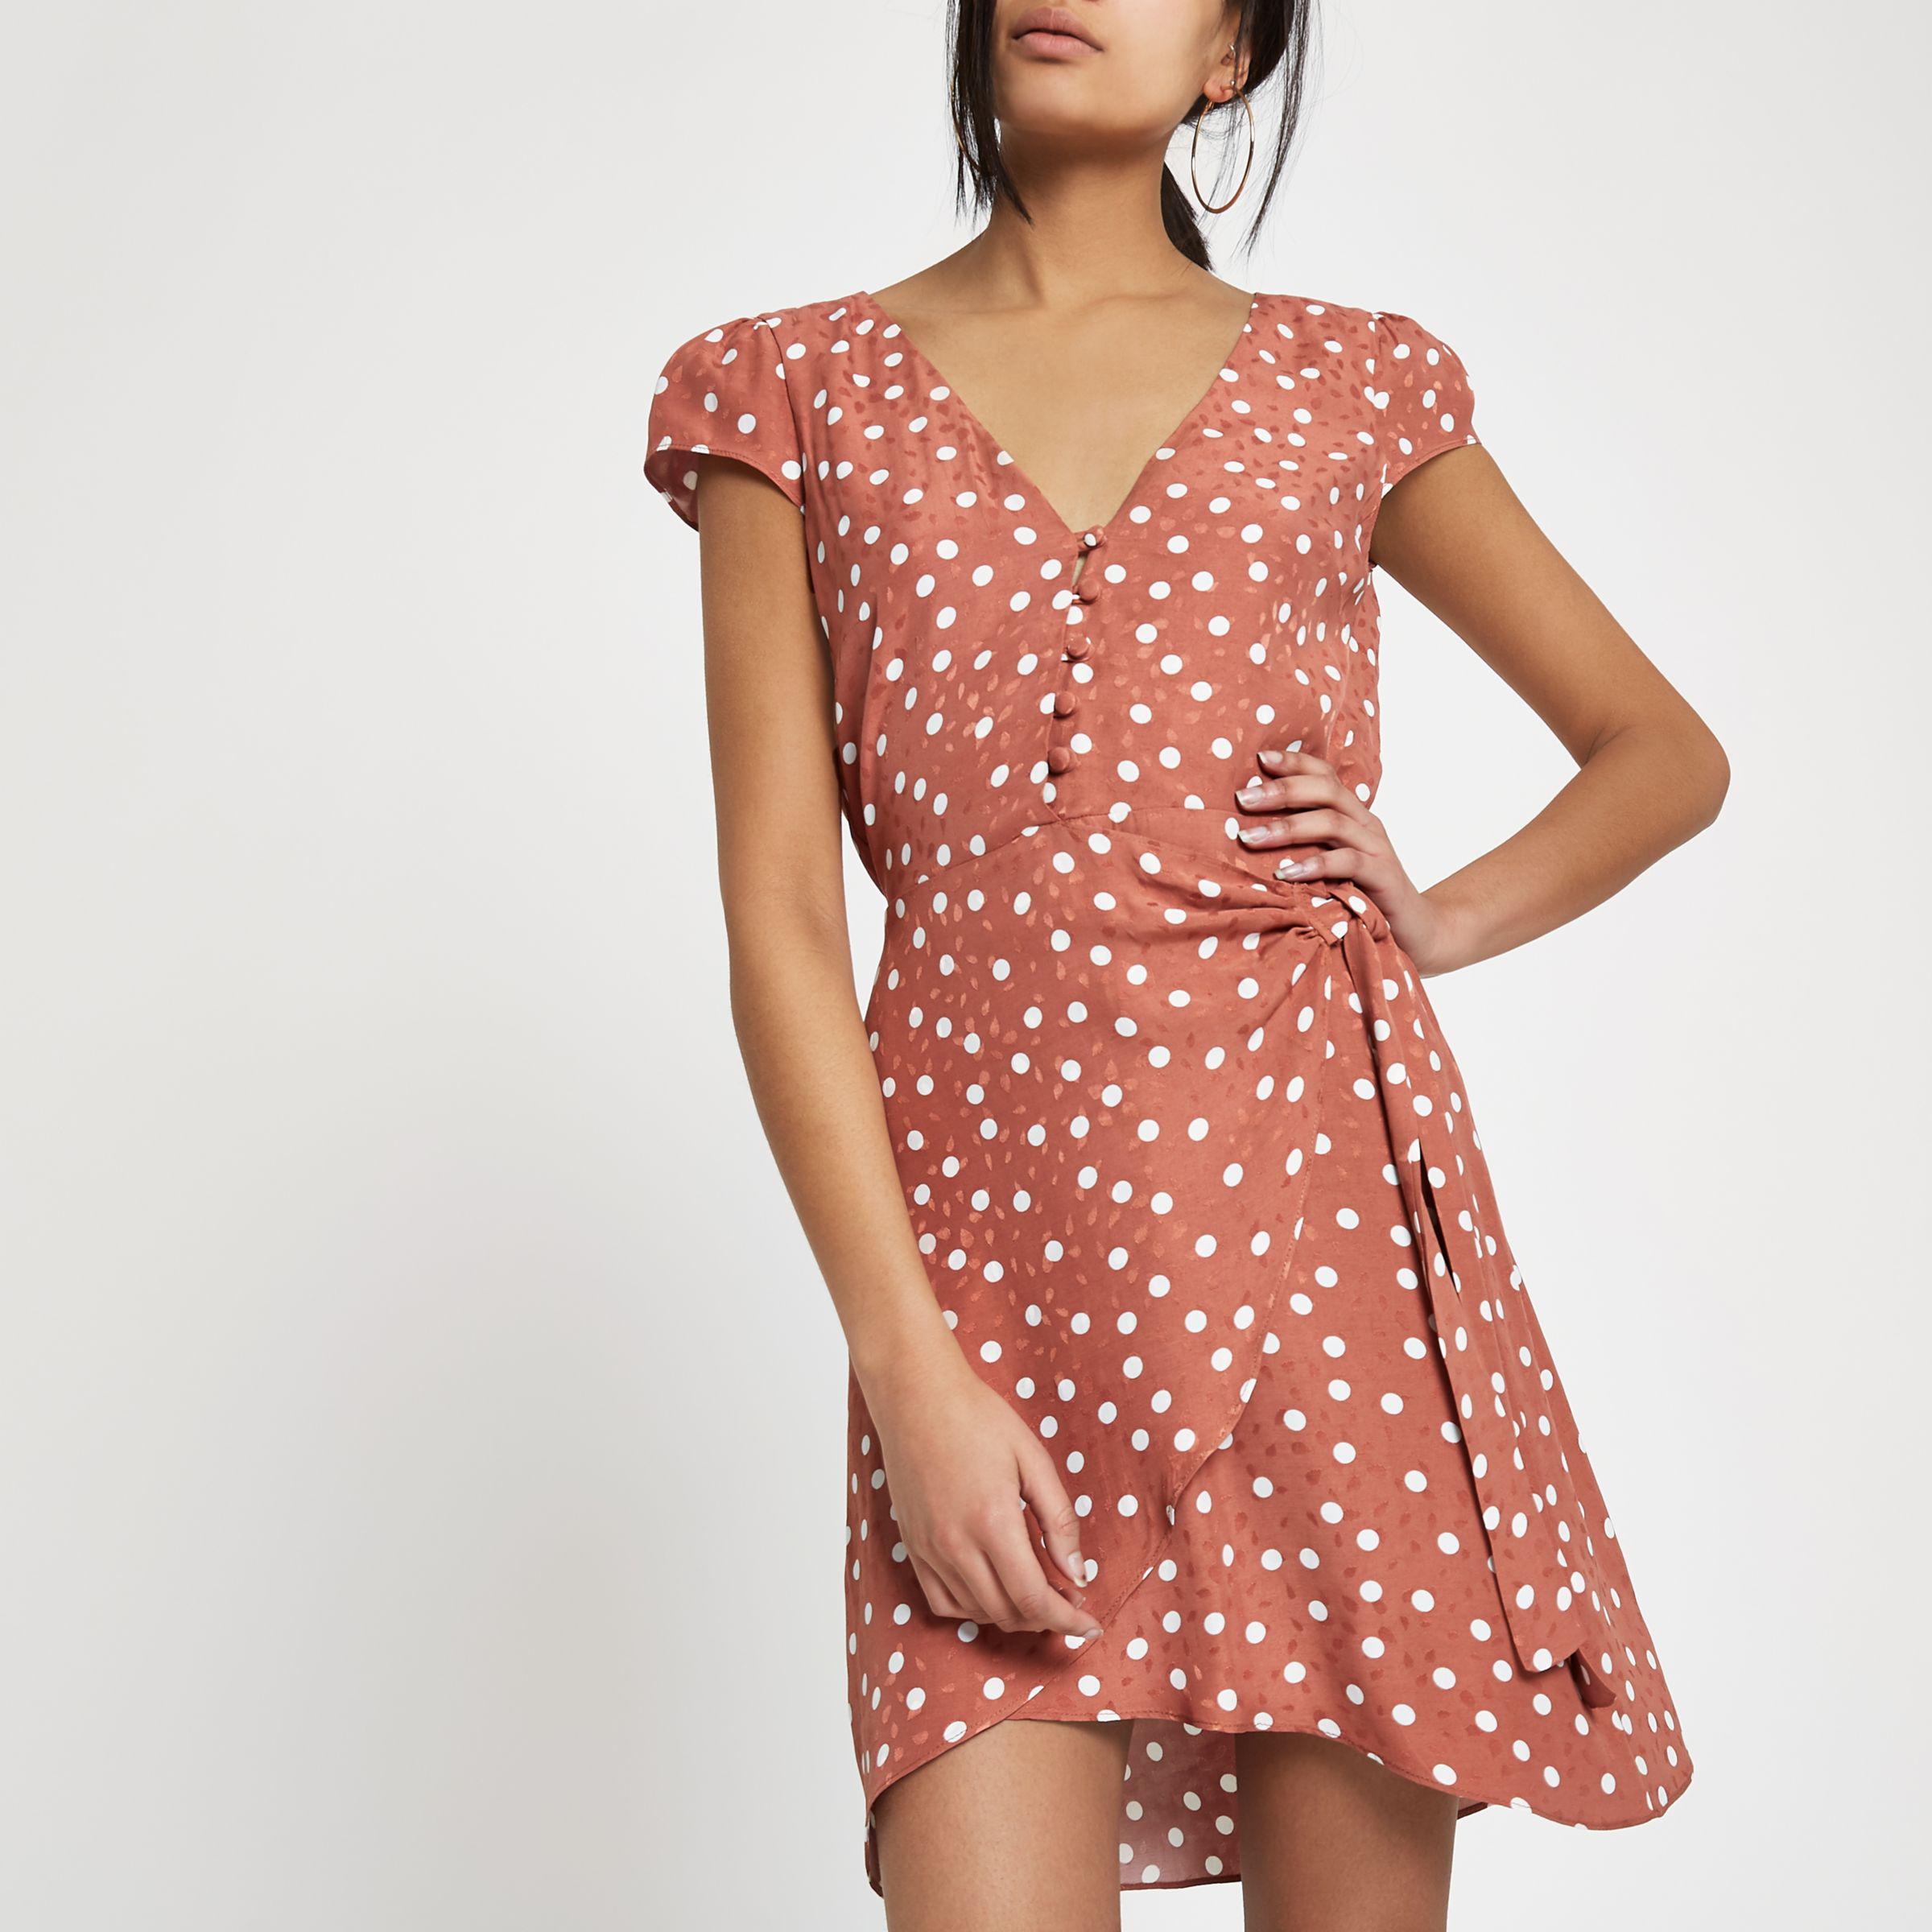 River Island Synthetic Polka Dot Cap Sleeve Wrap Dress in Brown | Lyst